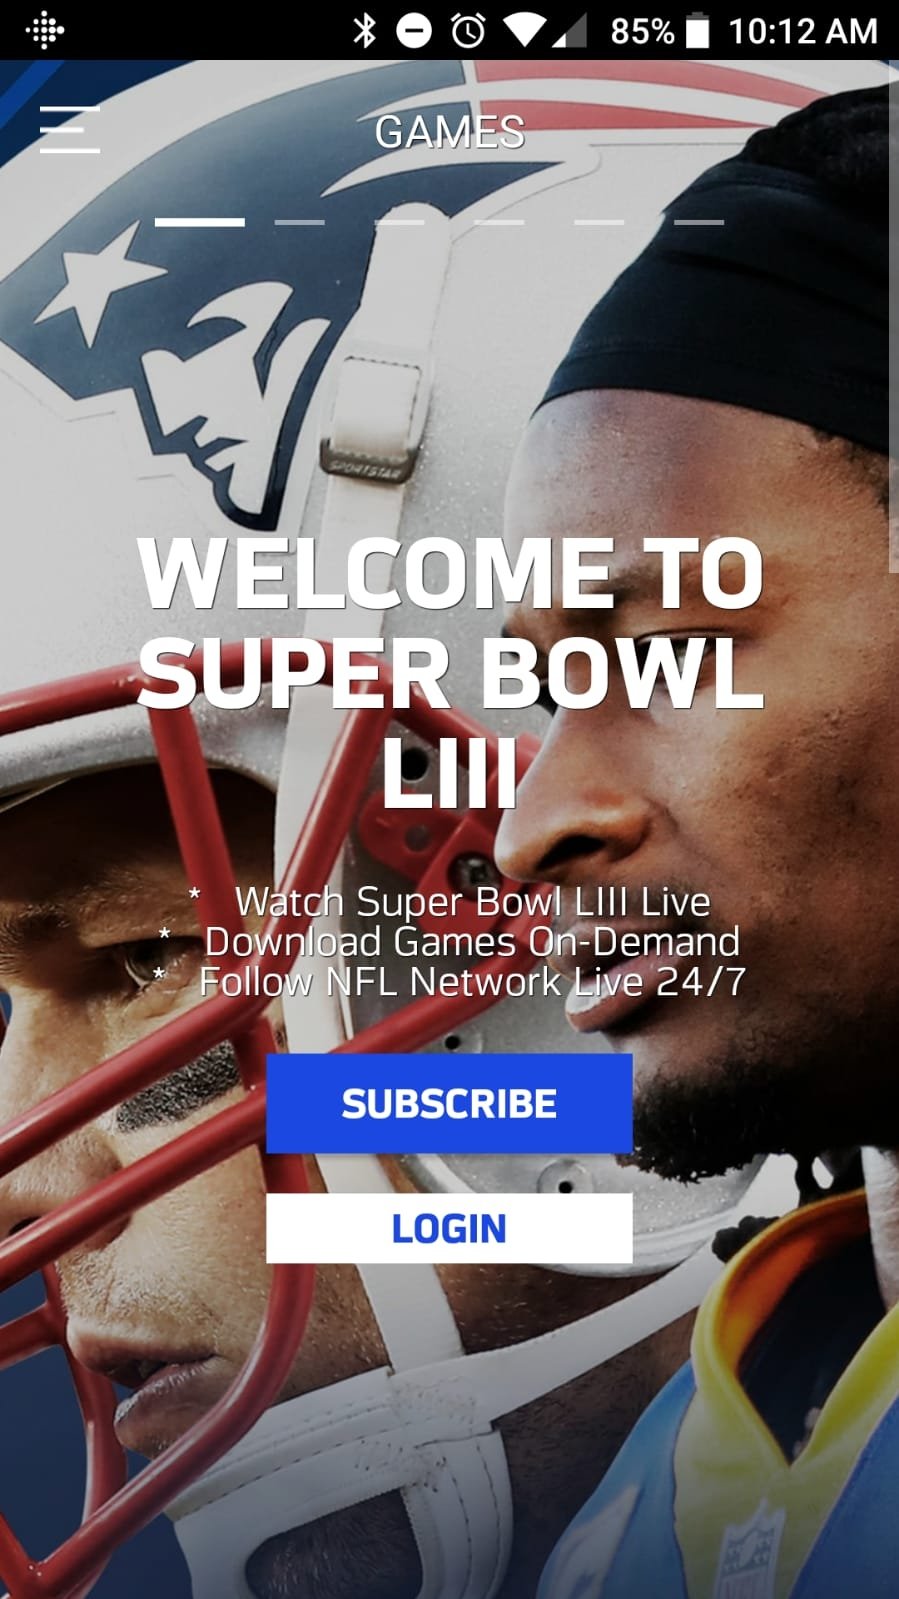 NFL Game Pass Europe APK Download for Android Free